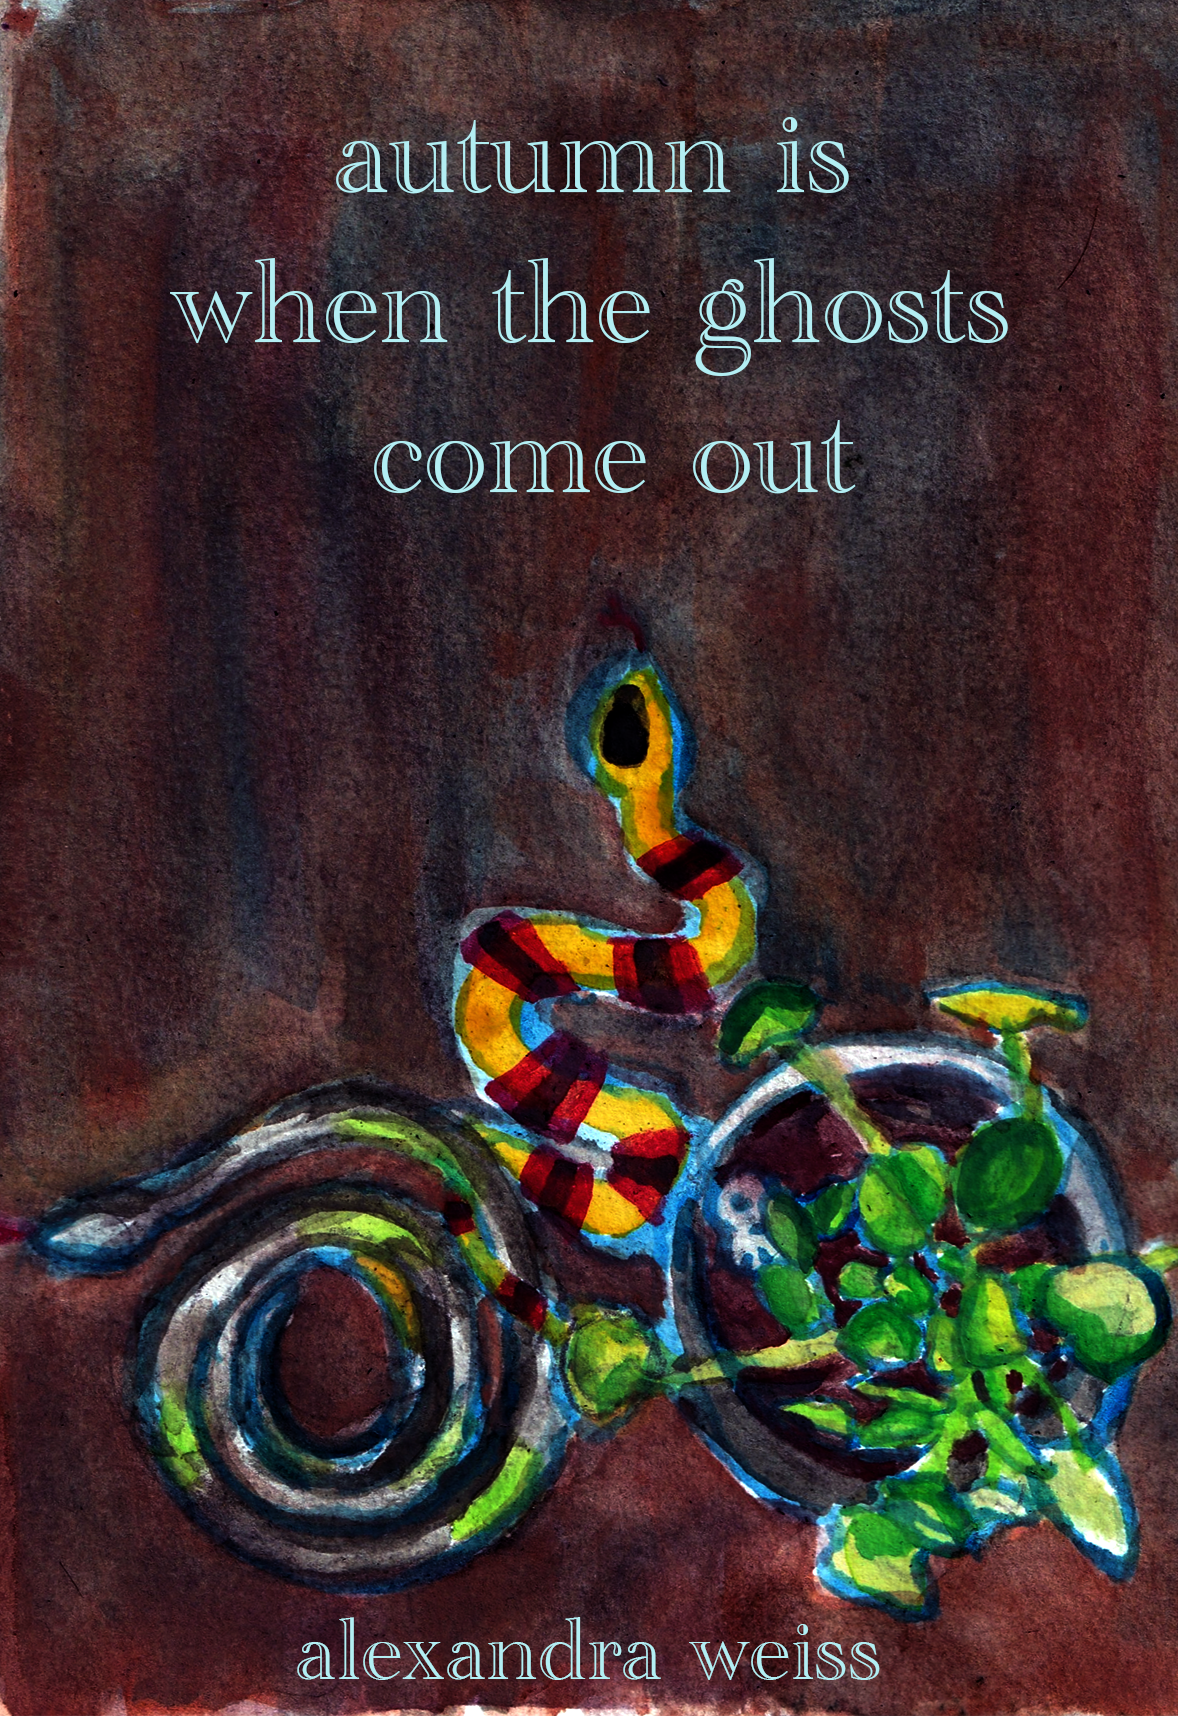 Book cover of autumn is when the ghosts come out by Alexandra Weiss. A painting of two snakes and a potted plant against a dark brown background. The title is at the top, author name at the bottom. There’s a little skull in the planter.